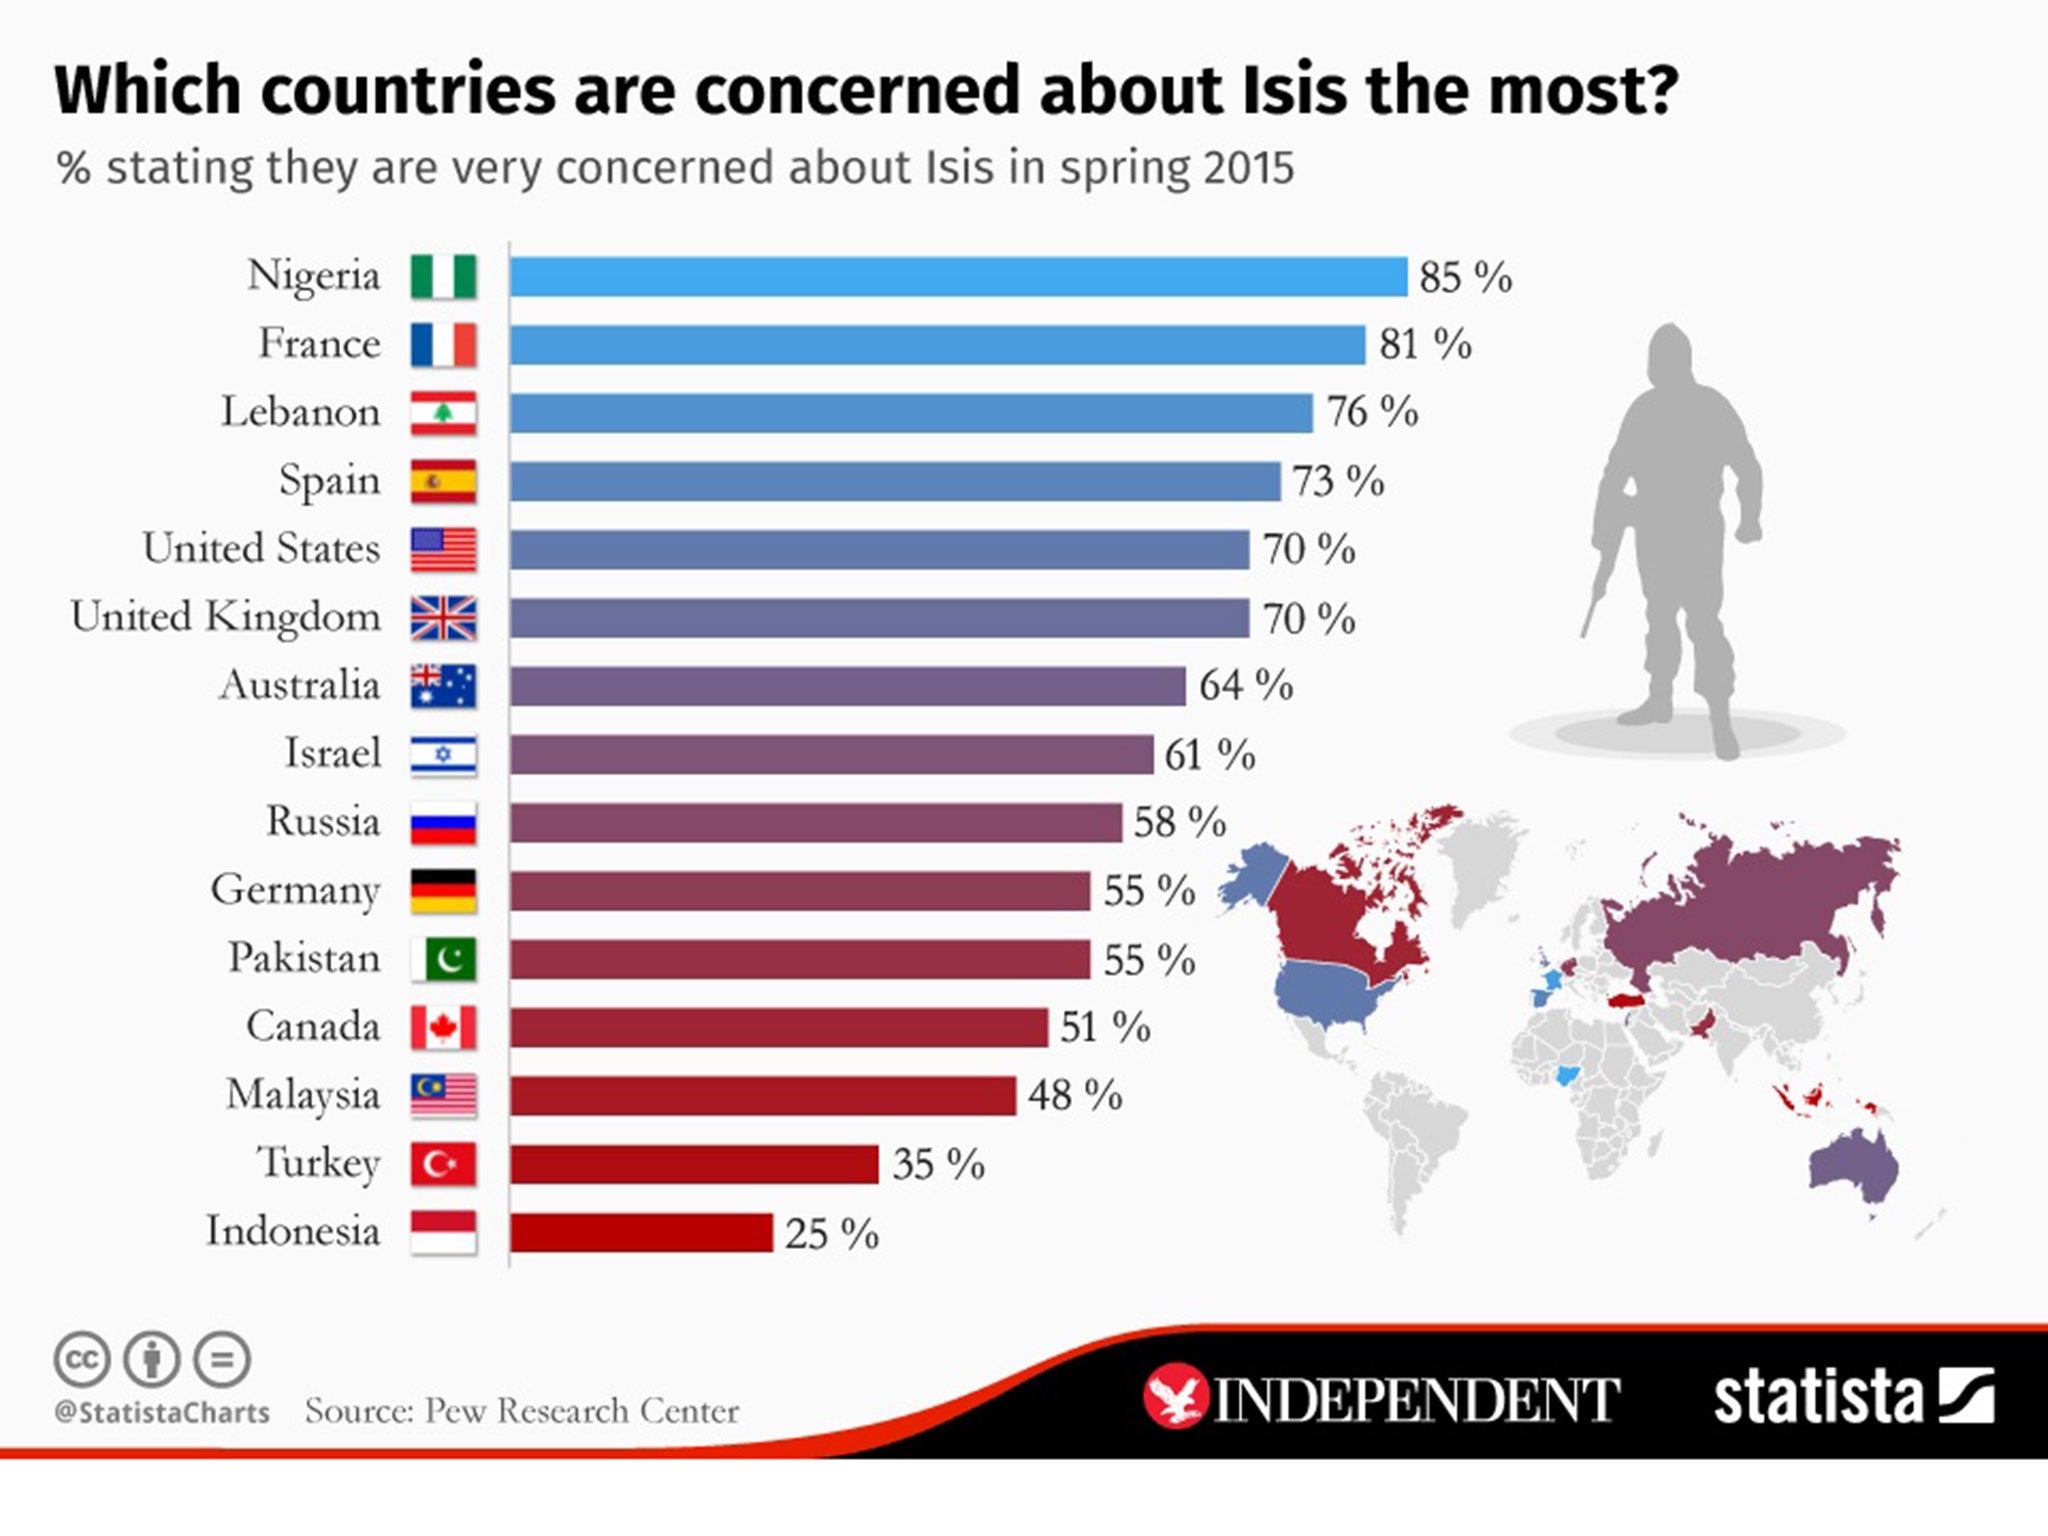 The chart showing which countries are most concerned about the rise of Isis